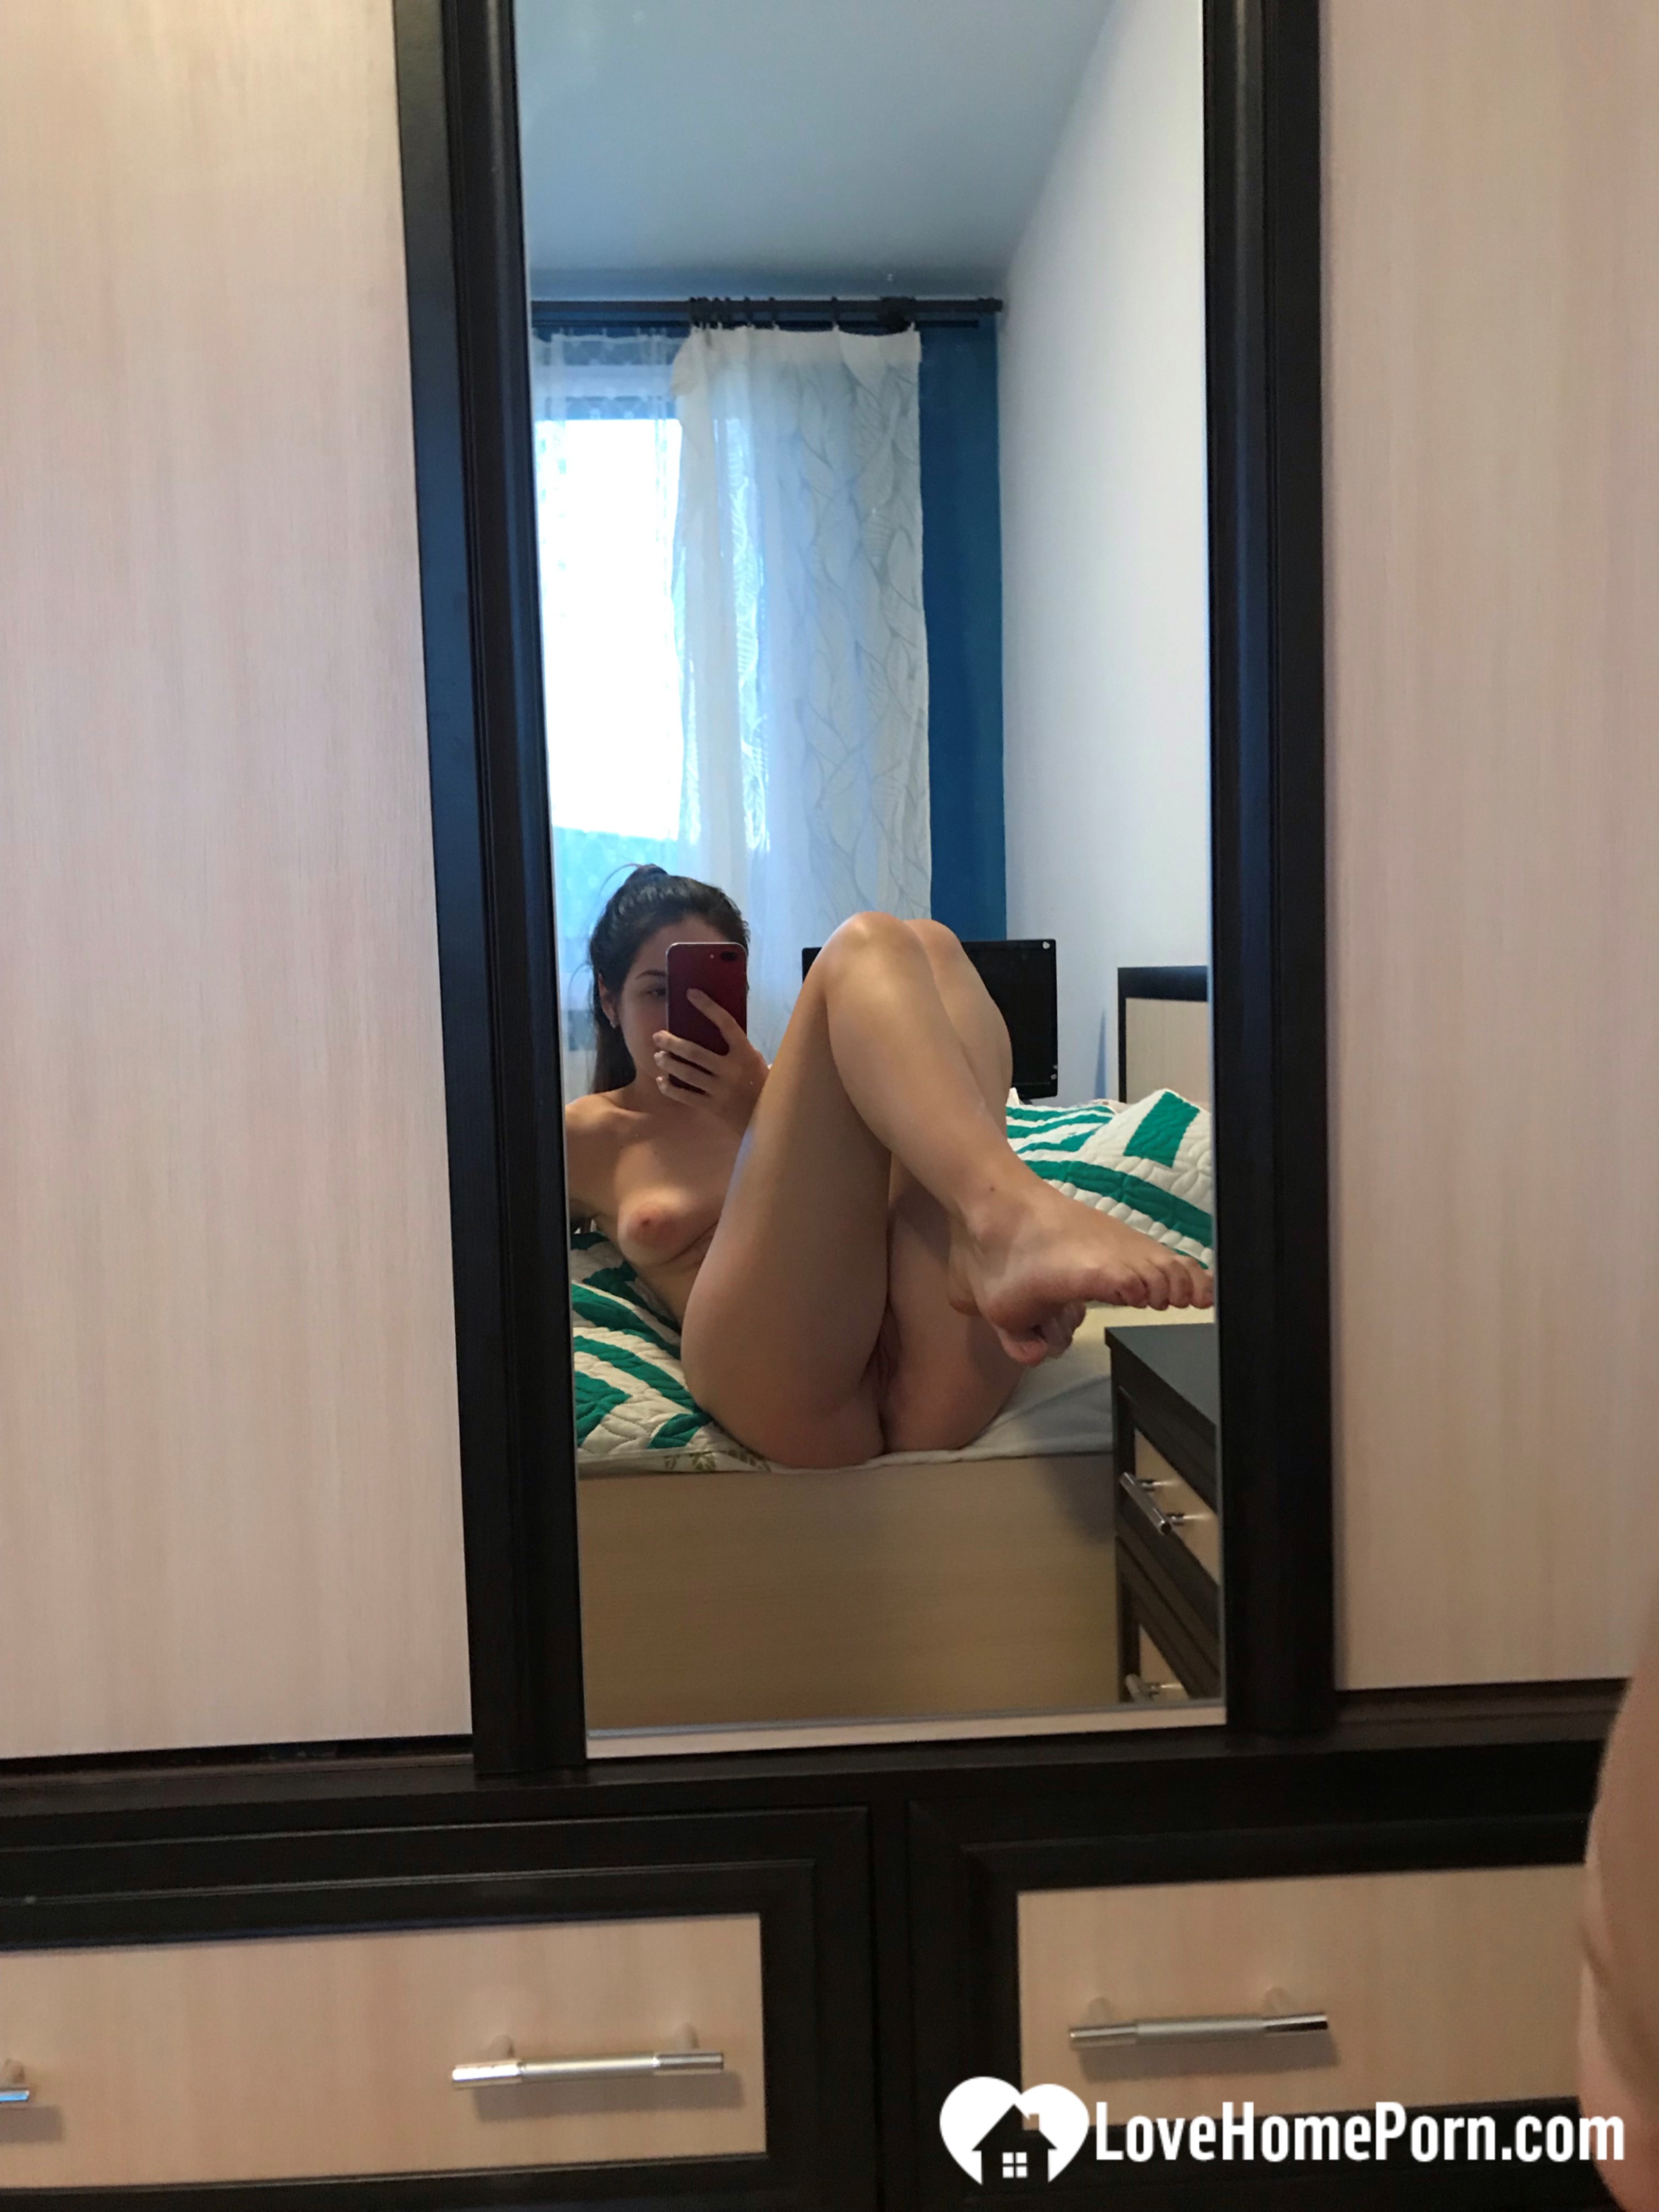 I bought a new mirror so I'm sharing